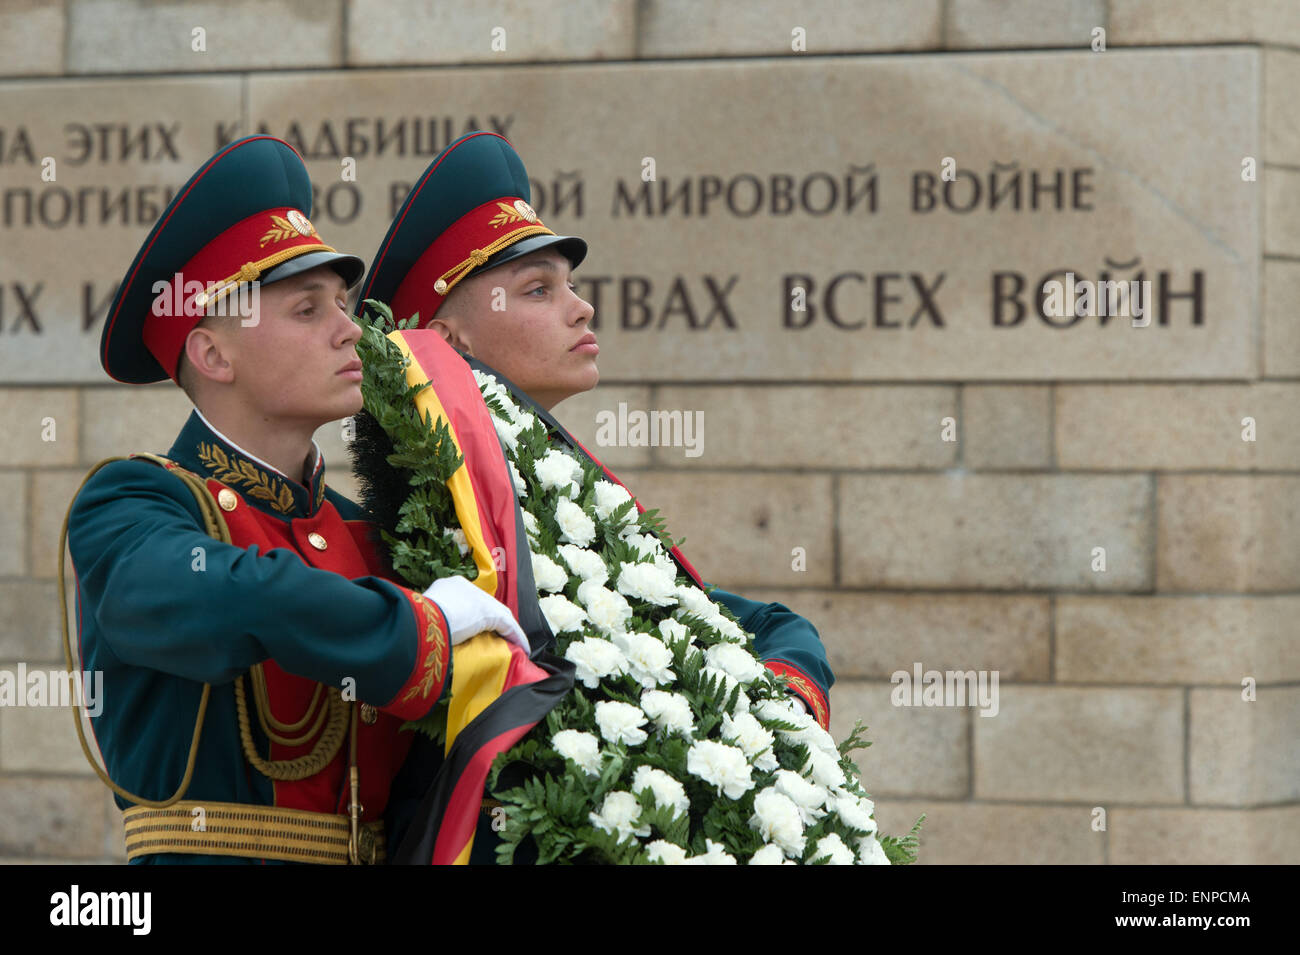 Volgograd, Russia. 7th May, 2015. Soldiers carry a wreath with a German ribbon at the Rossoschka military cemetary near Volgograd, Russia, 7 May 2015. Photo: Soeren Stache/dpa/Alamy Live News Stock Photo